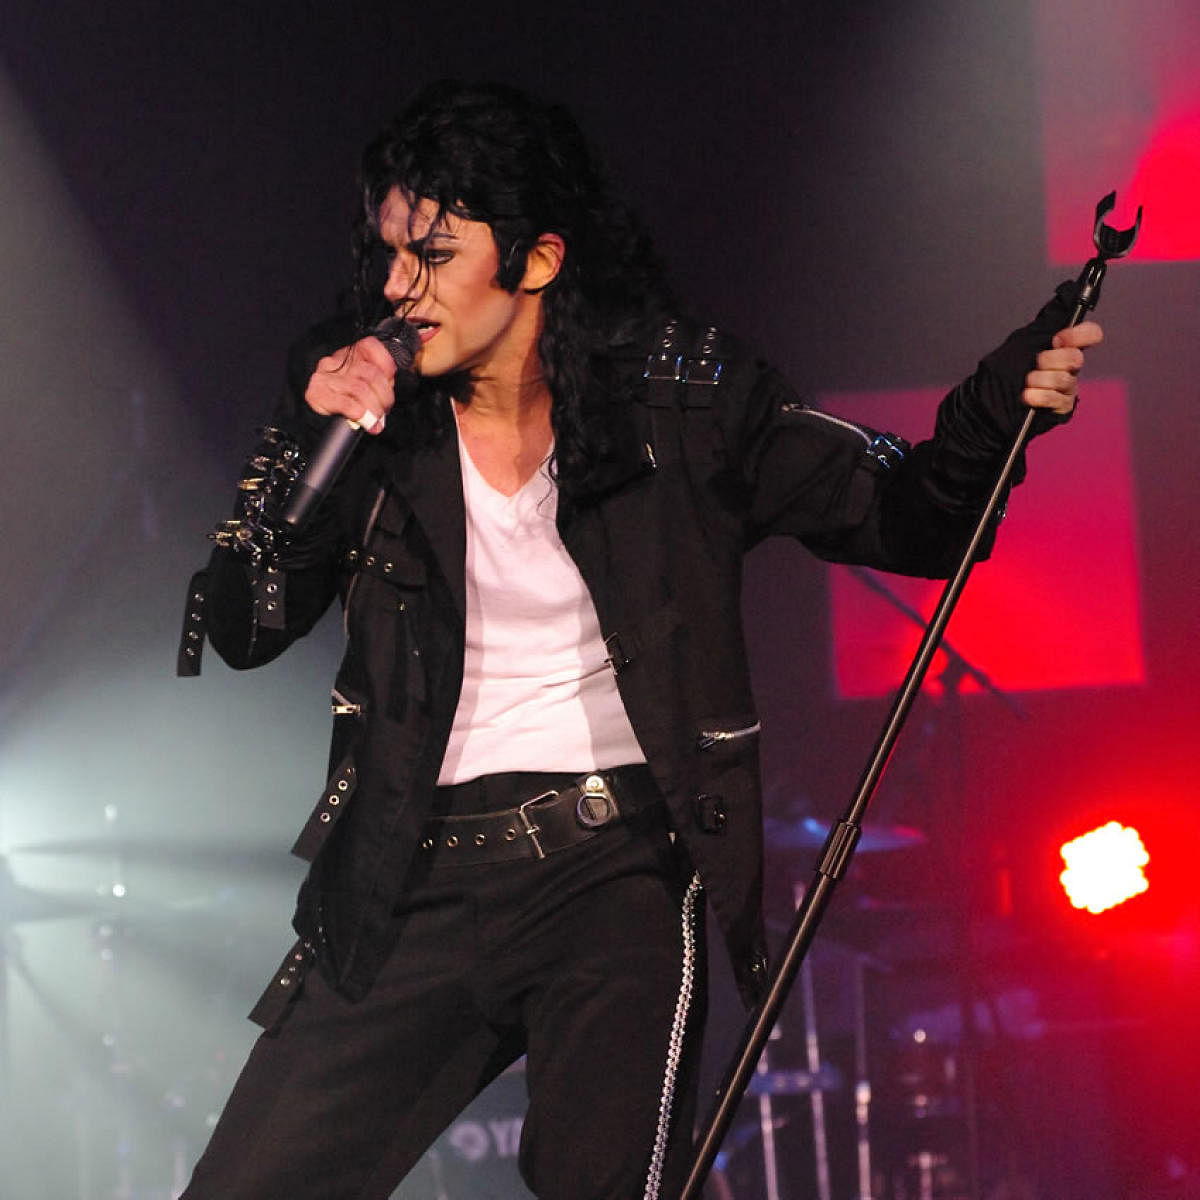 Michael Firestone has travelled the world as a tribute artist to Michael Jackson.